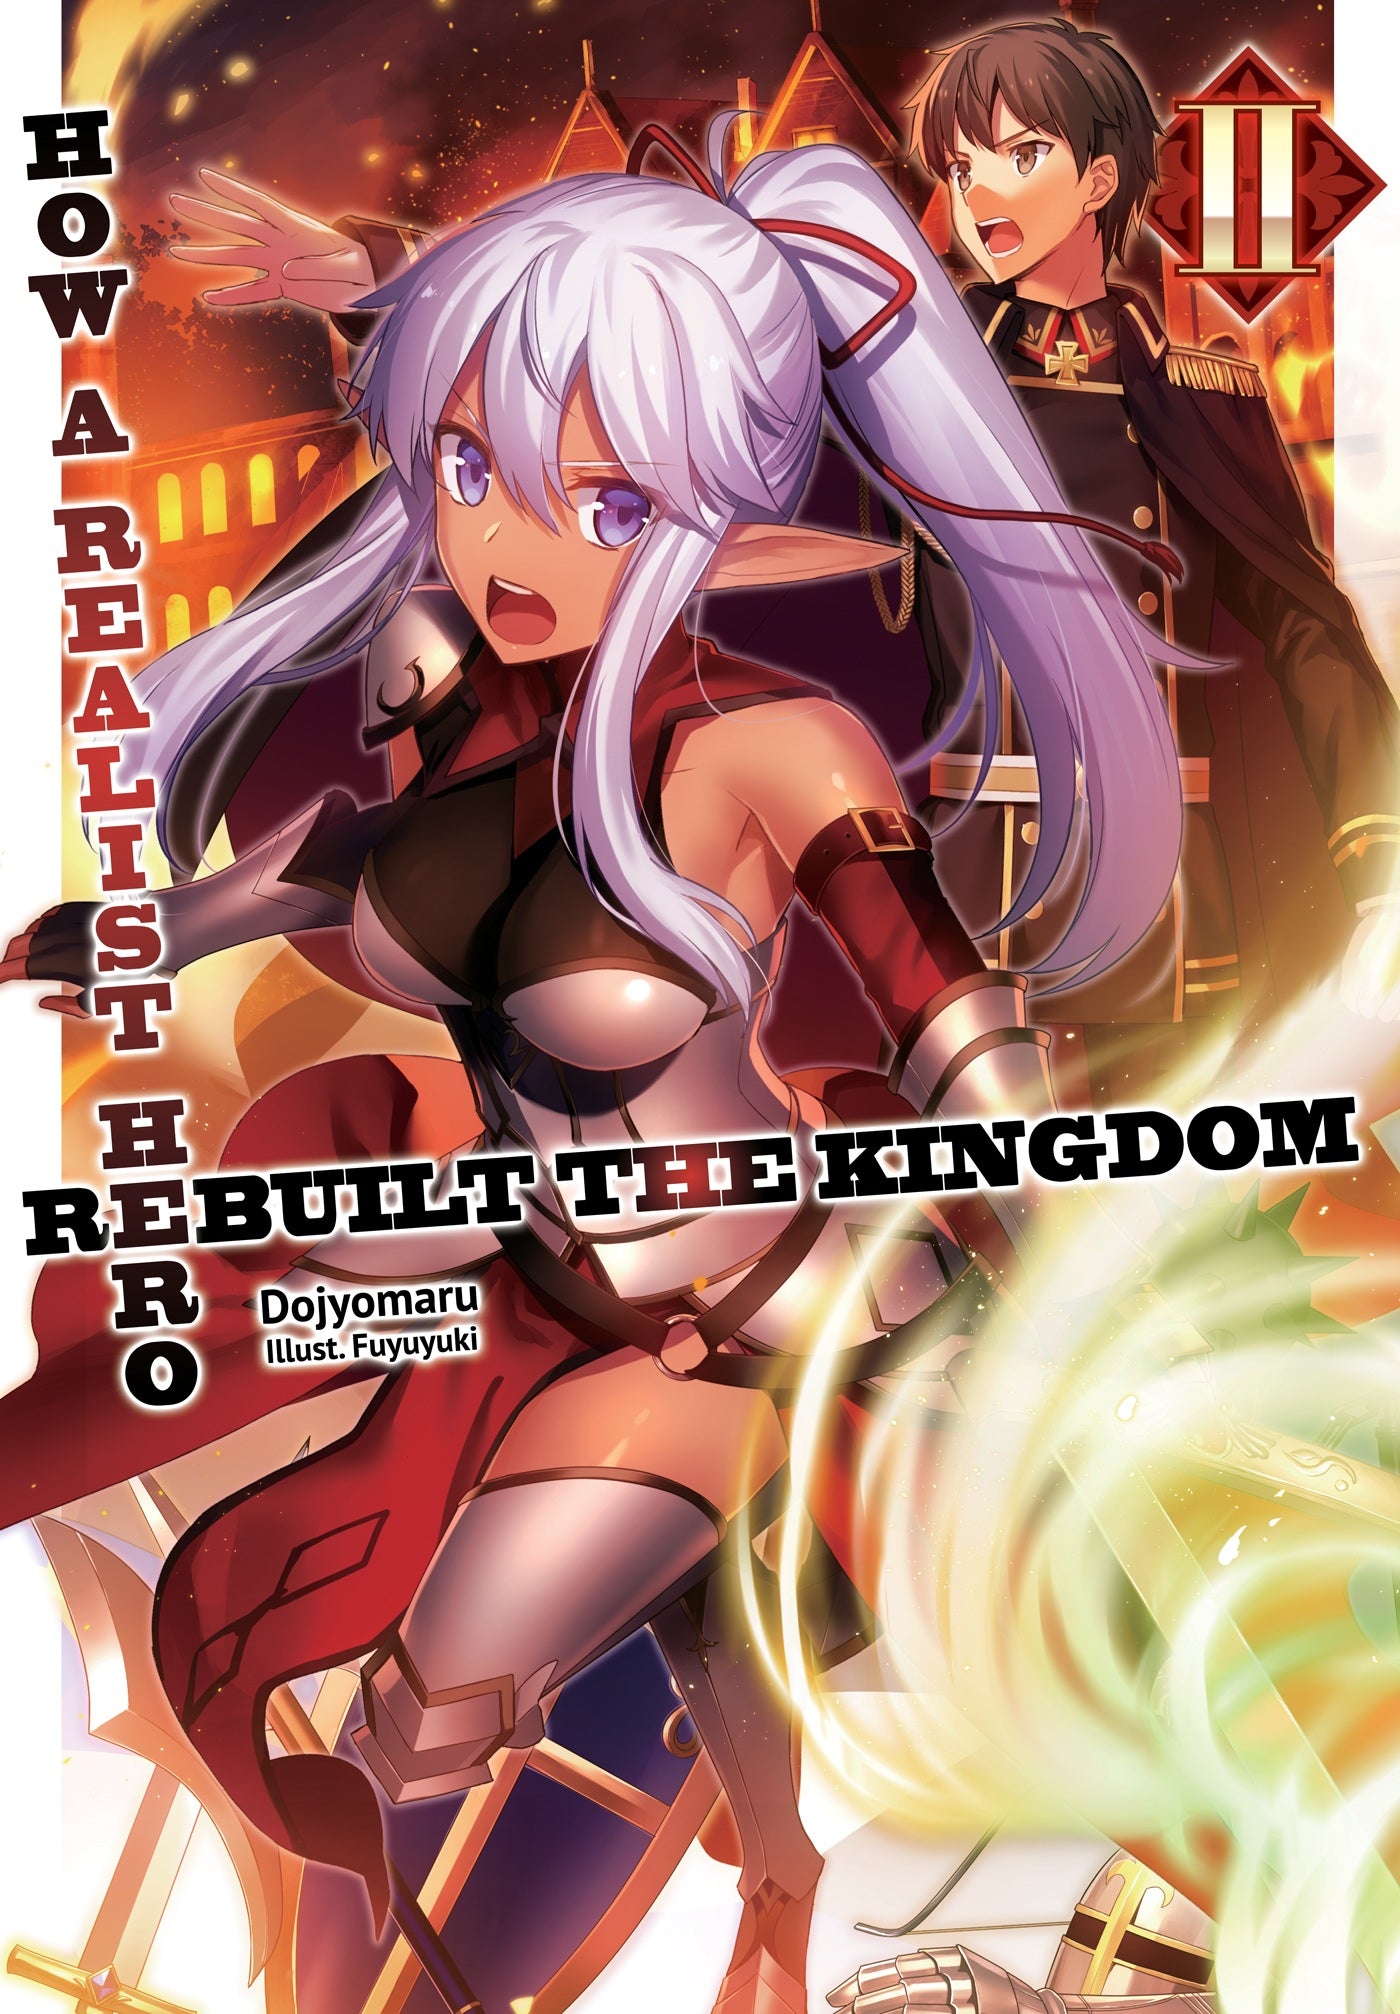 How a Realist Hero Rebuilt the Kingdom (Light Novel) Vol. 02 (Out of Stock Indefinitely)